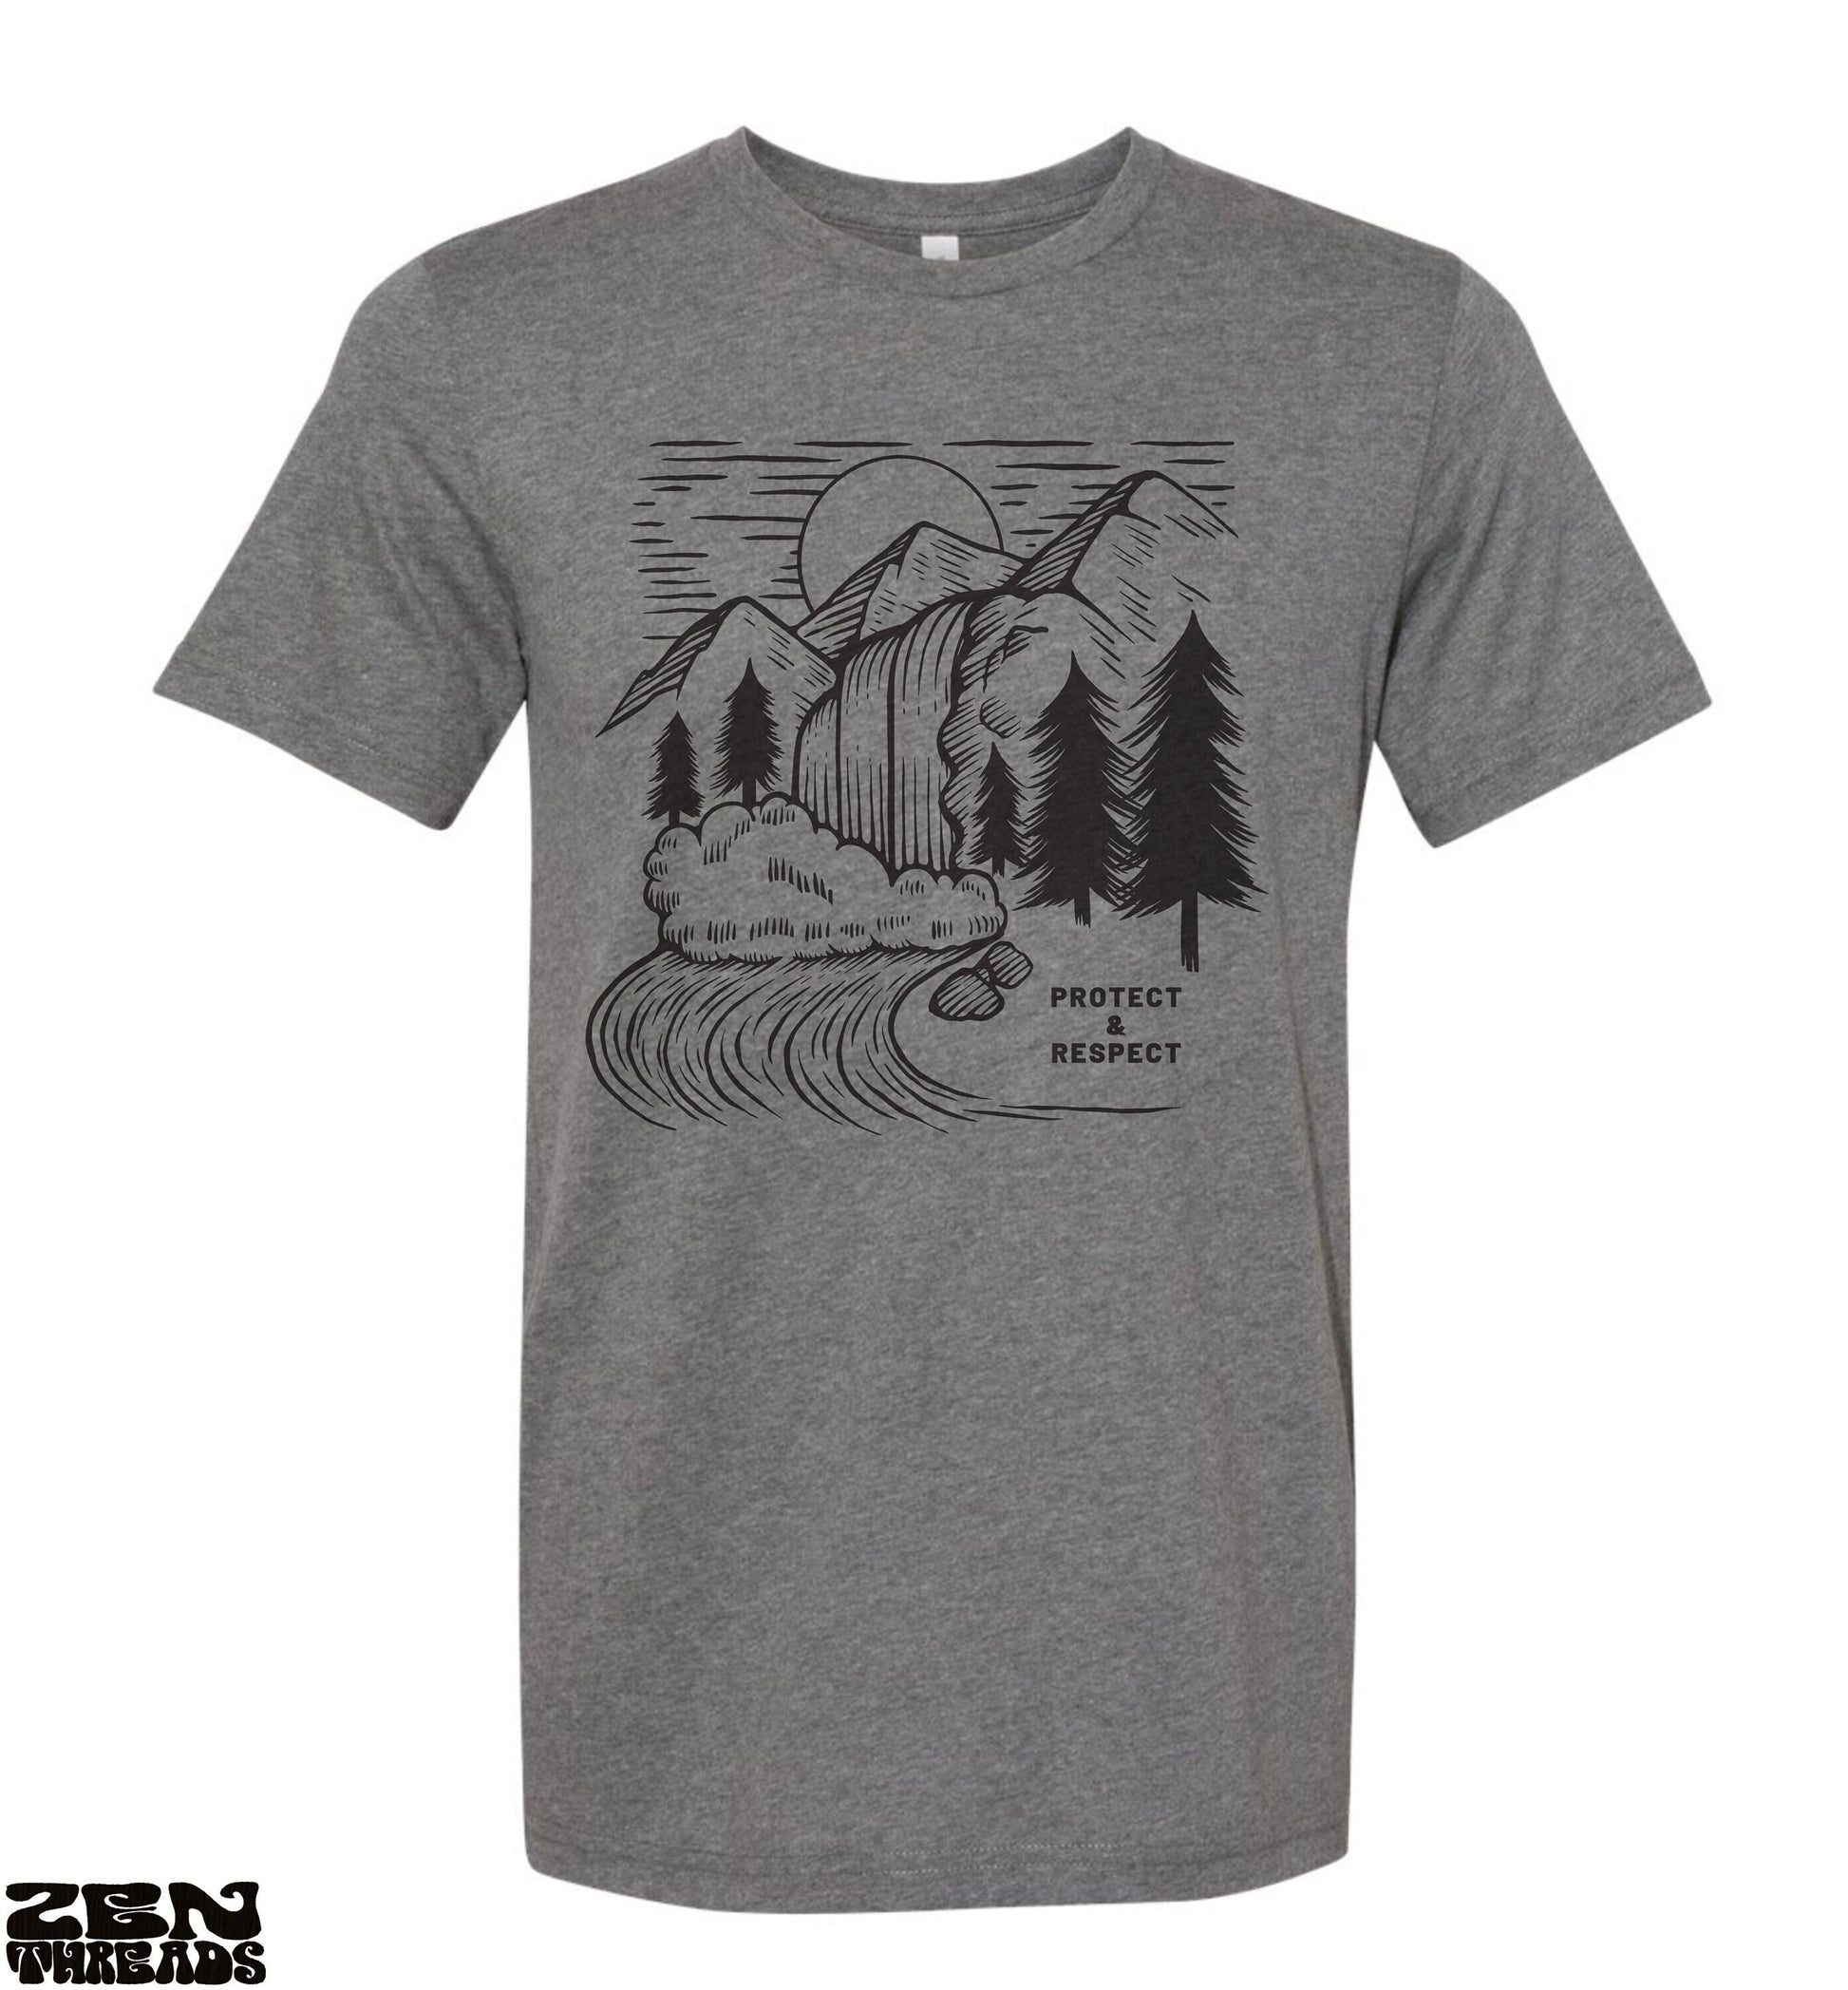 Landscape Unisex Bella Canvas national parks T Shirt eco soft printed tee mens women's adventure camping hiking nature lover trees gift